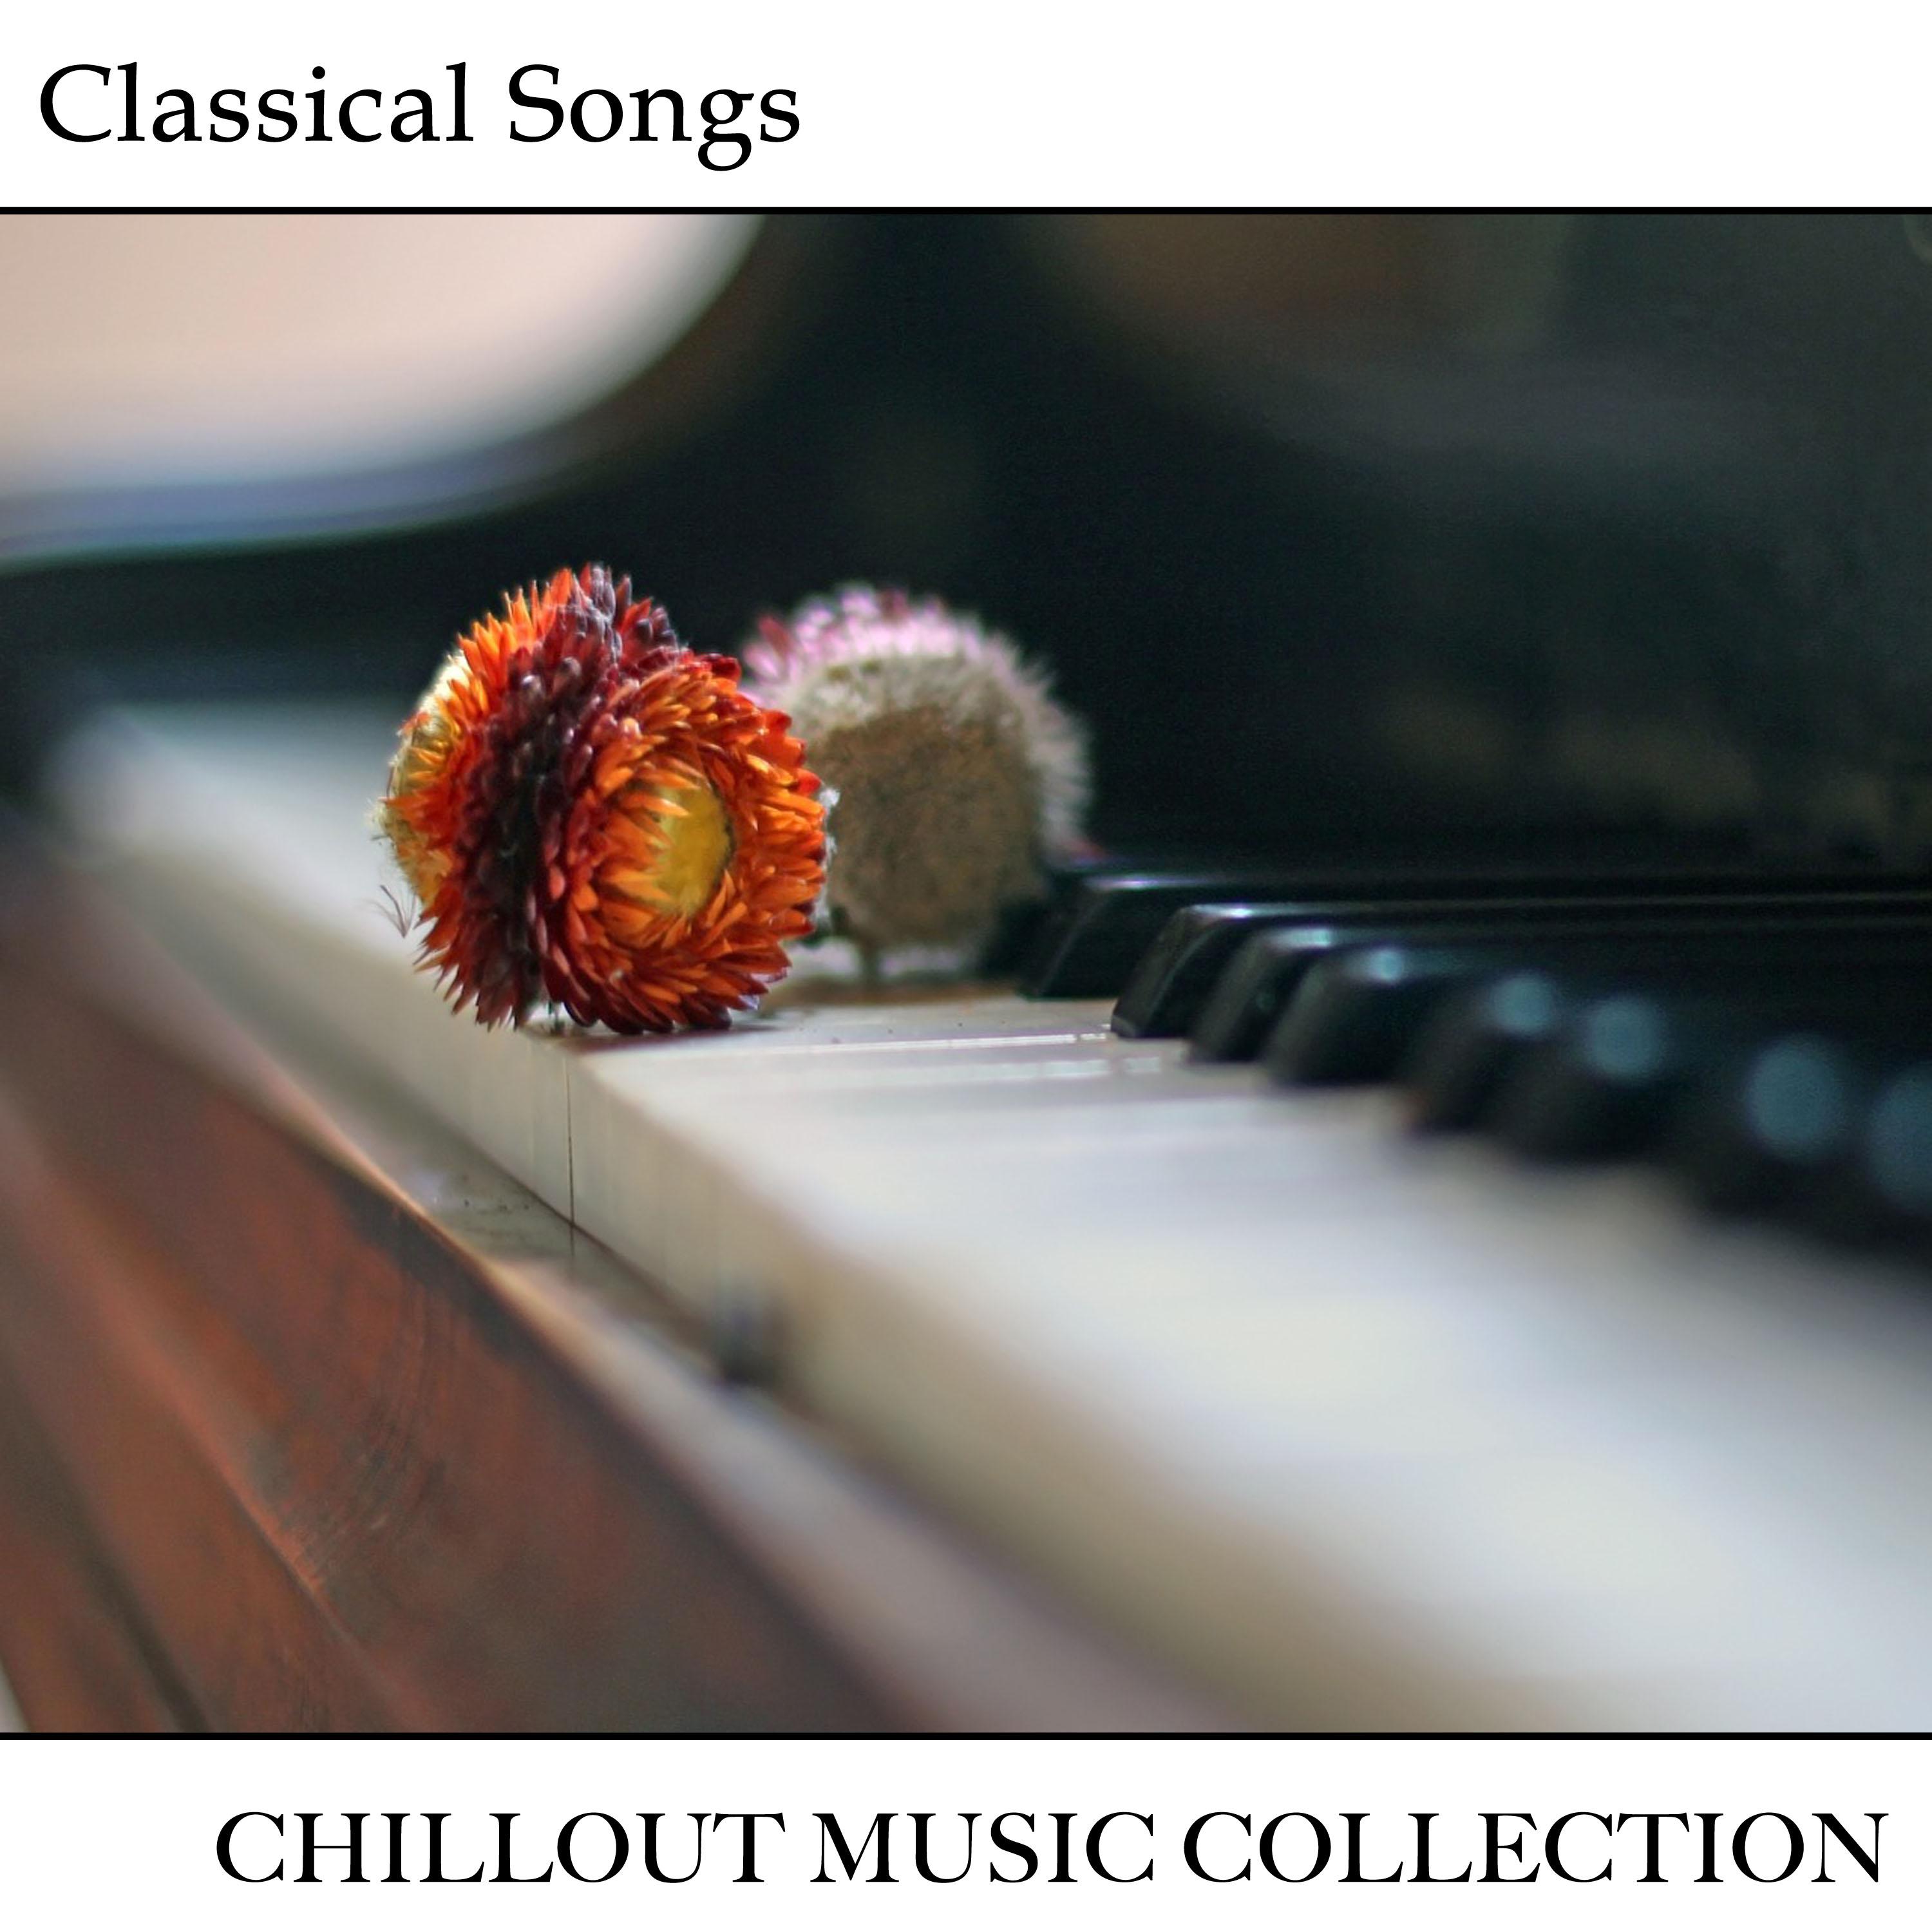 12 Classical Songs: Relaxation & Chillout Music Collection